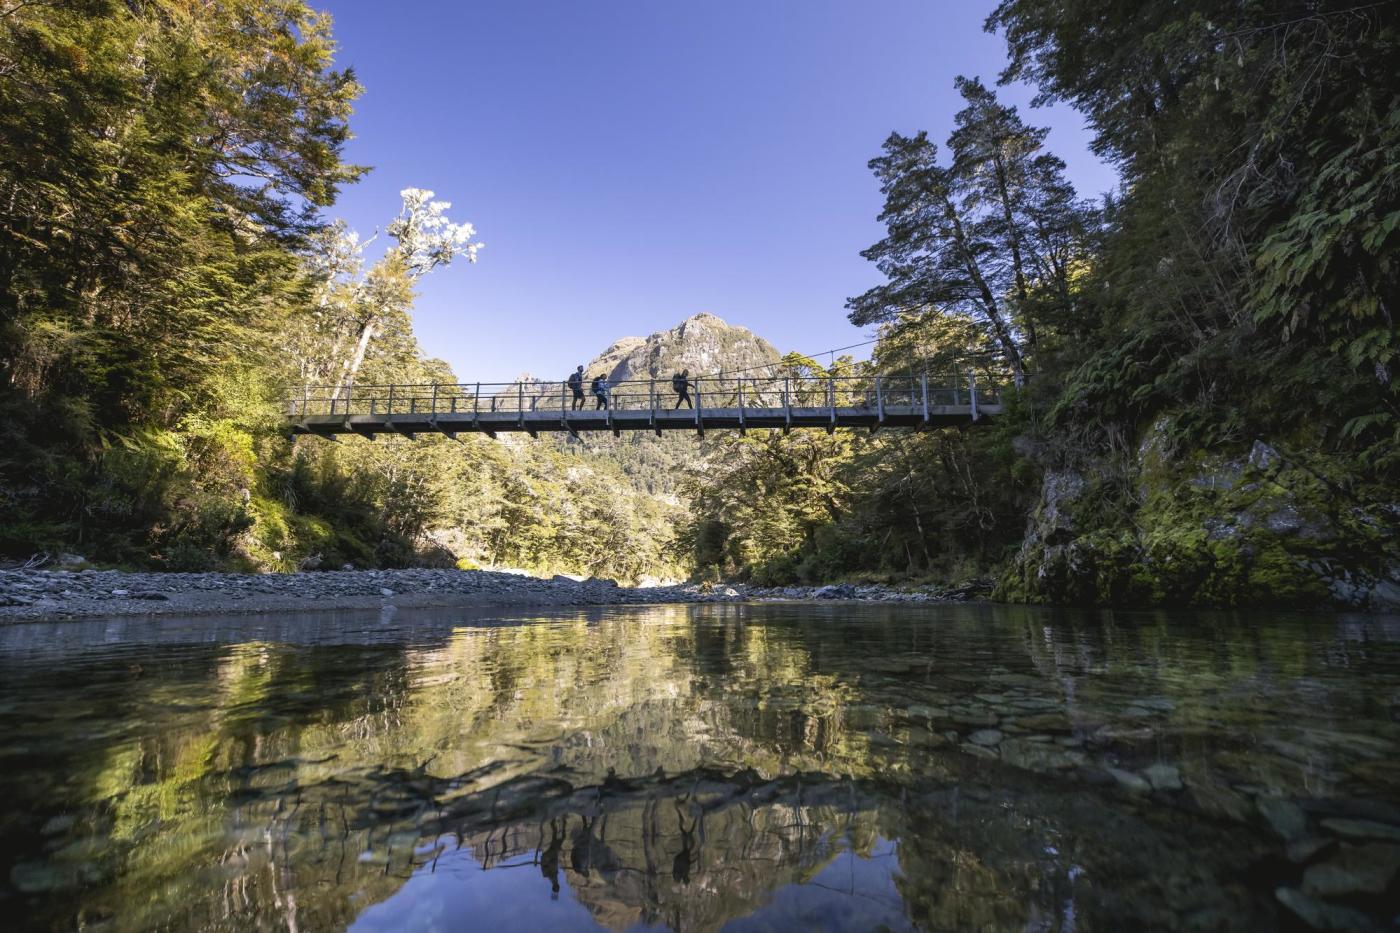 Ground of friends crossing a swing bridge on the Routeburn Track with a mountain in the background